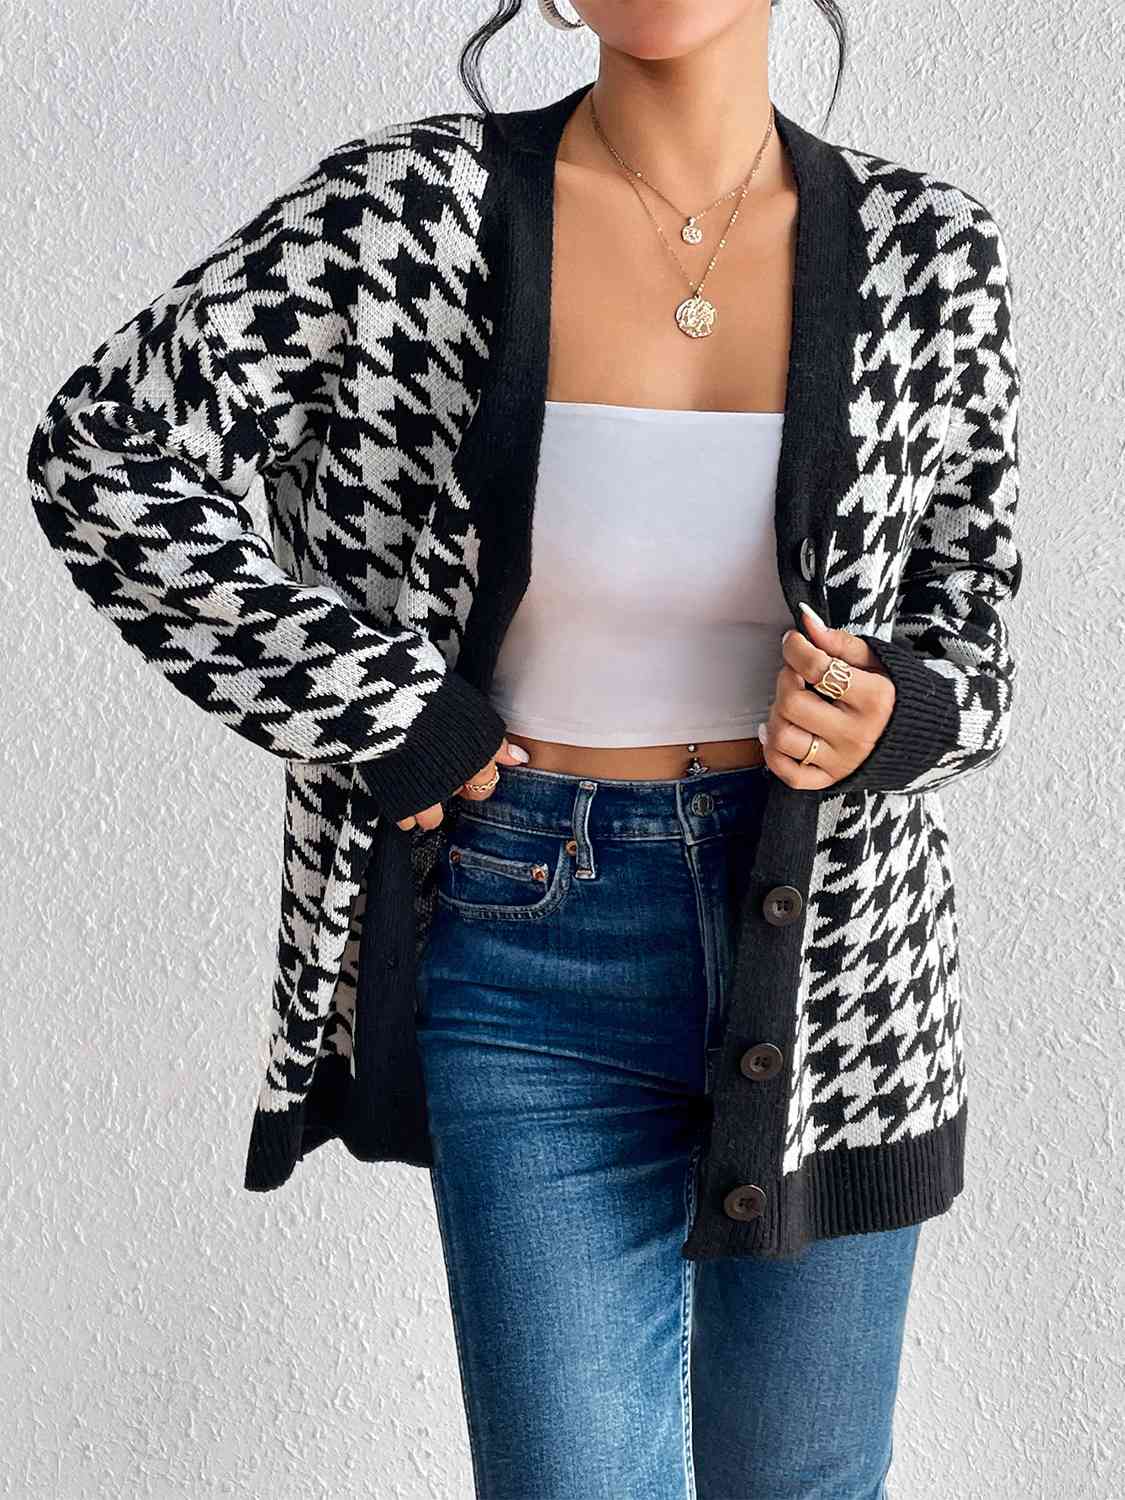 Houndstooth Button Down Cardigan - Lola Cerina Boutique